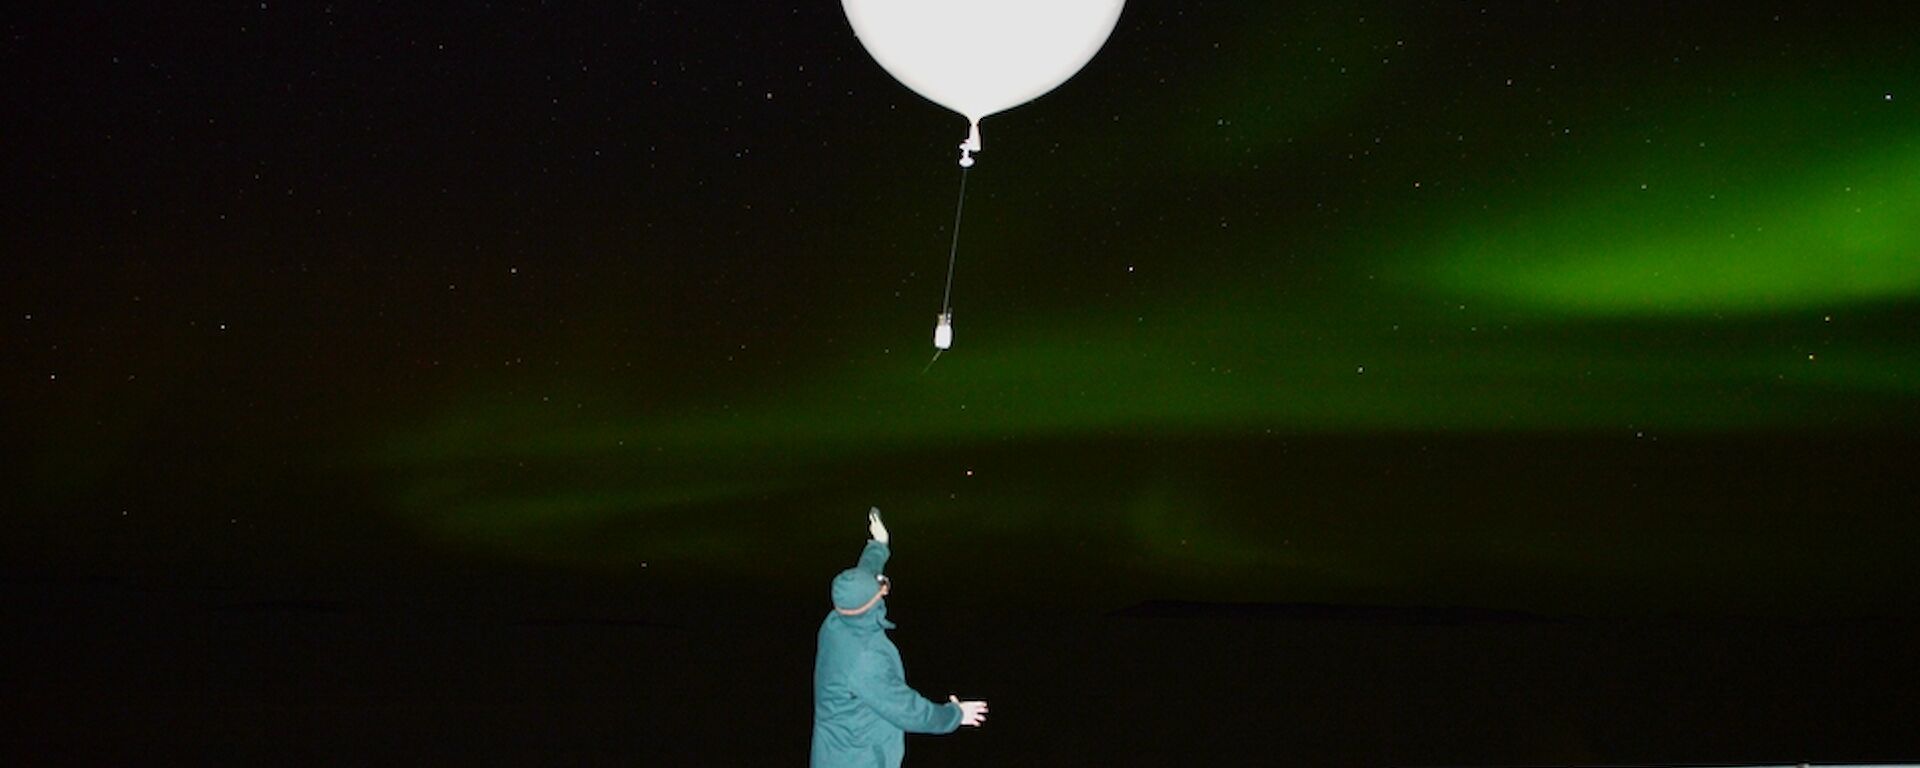 Observer wearing protective attire releasing an 800gm balloon with radiosonde, green Aurora Australis in the background